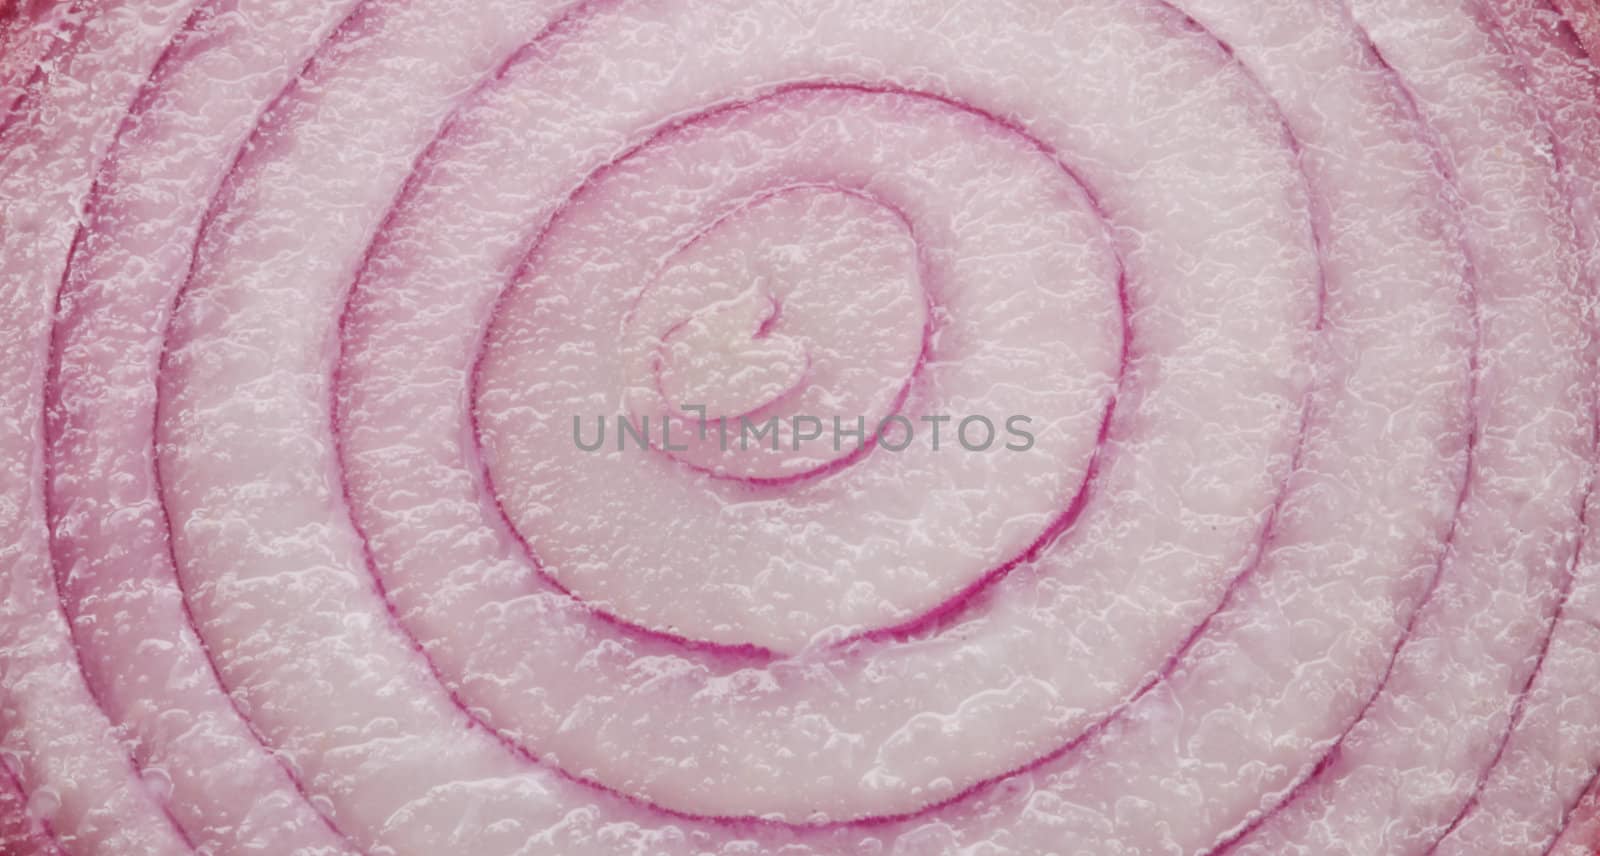 A fresh red onion cut in half exposing the circular rings in a close up shot